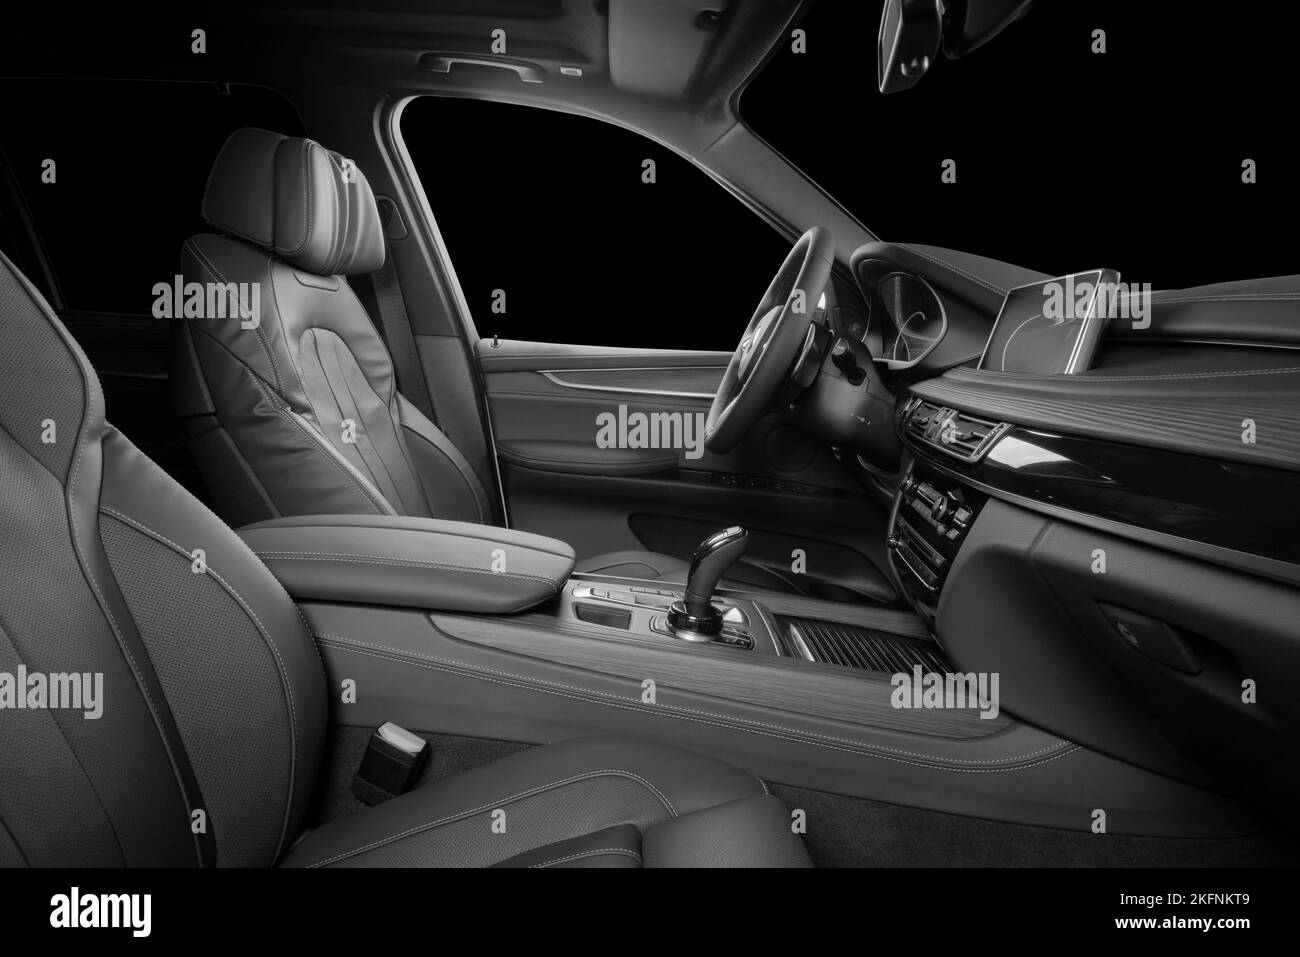 Black and whute luxury car inside Interior - steering wheel, shift lever and dashboard. Stock Photo